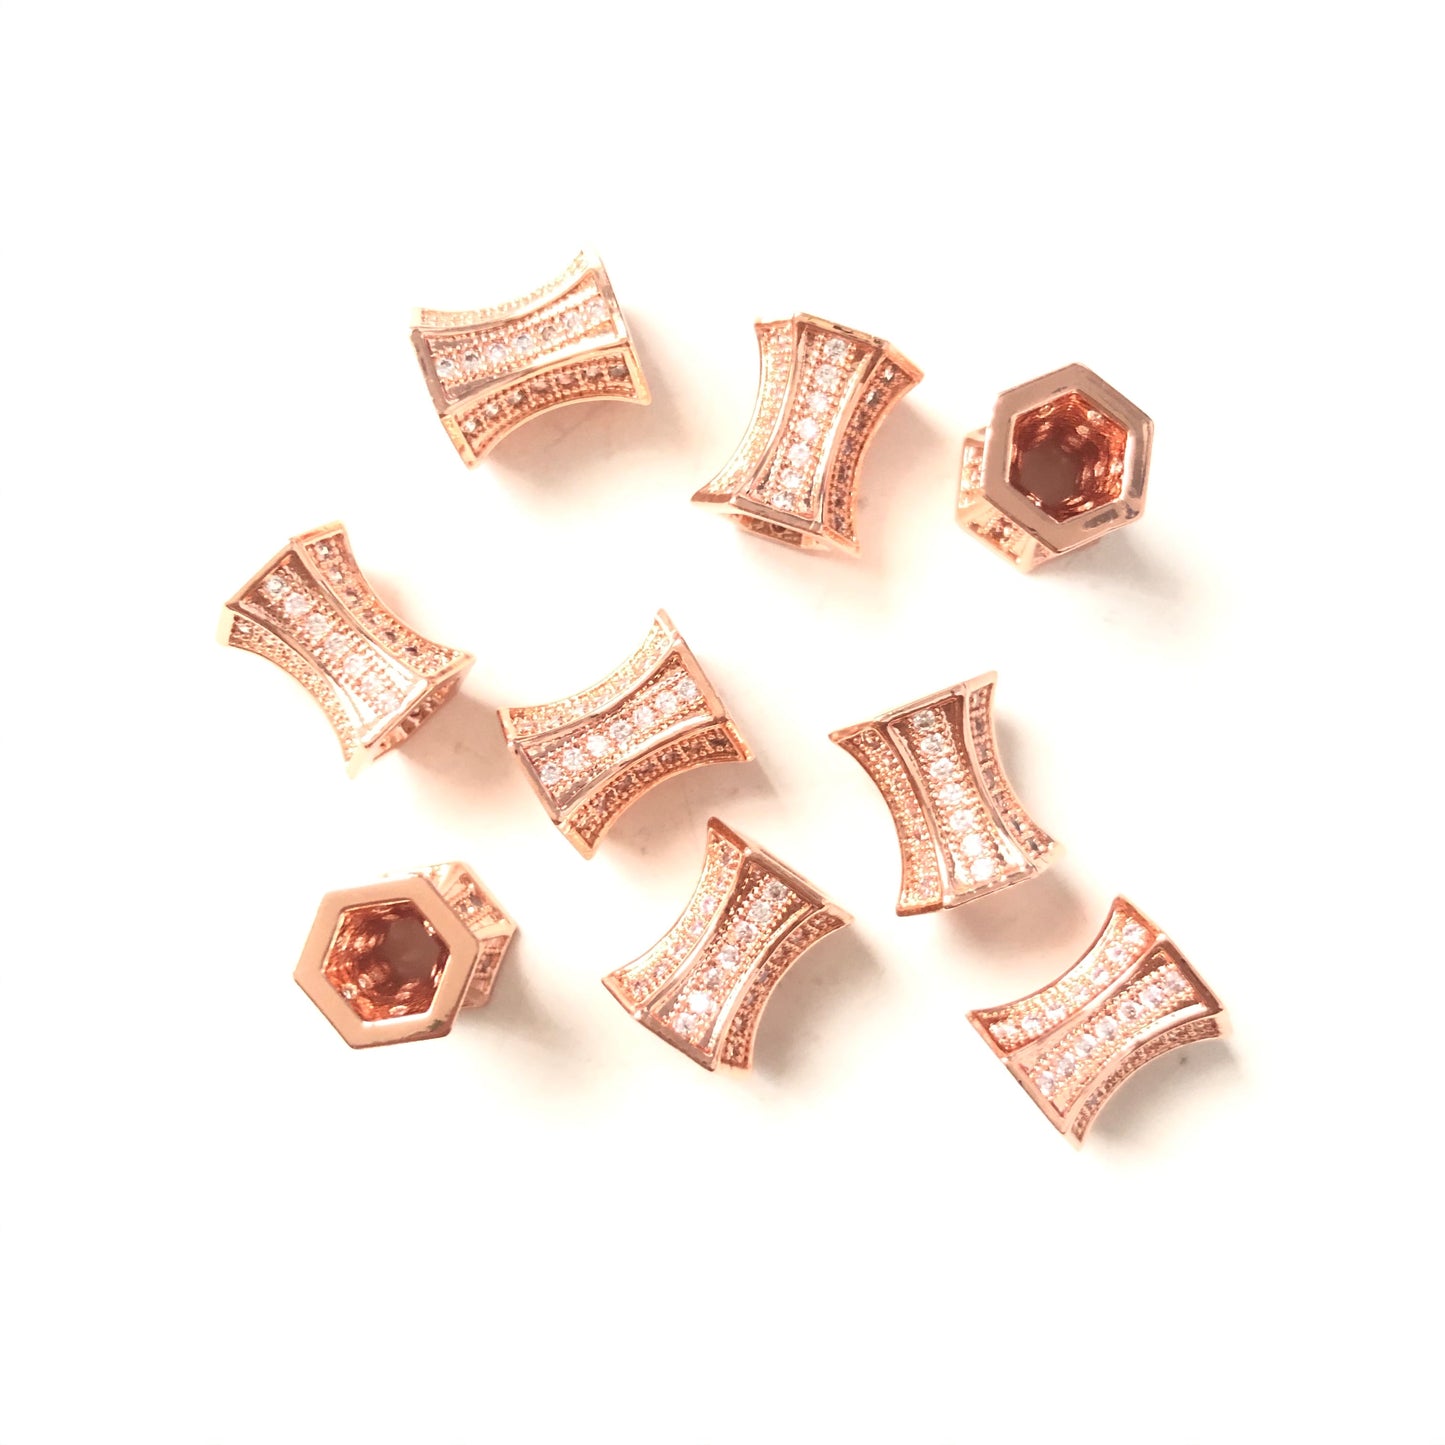 20pcs/lot 9.7*8.7mm CZ Paved Hourglass Spacers Rose Gold CZ Paved Spacers Hourglass Beads Charms Beads Beyond